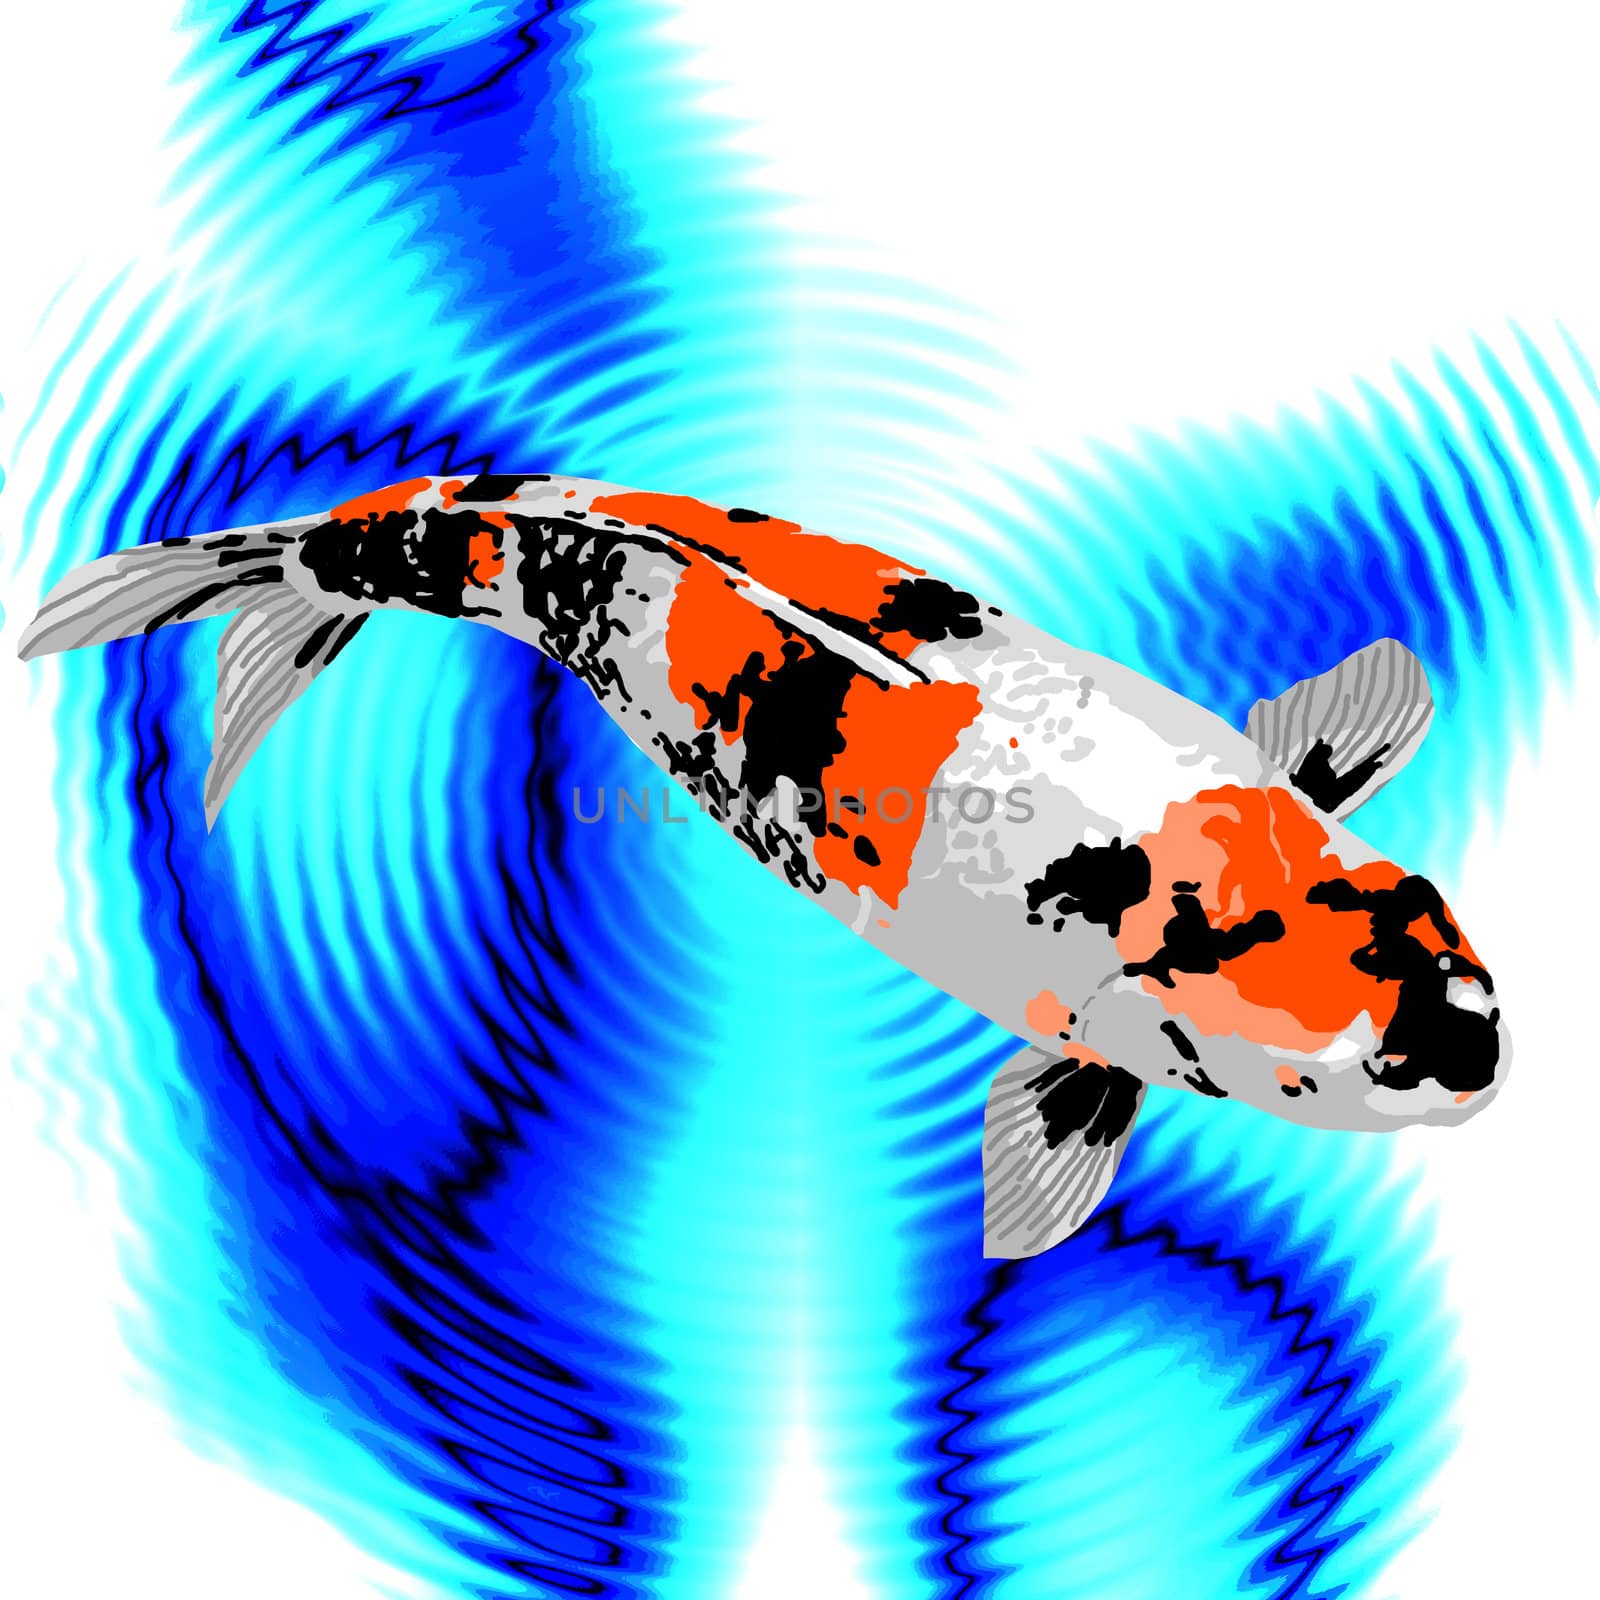 A black, orange, and white koi swimming peacefully in a pond.